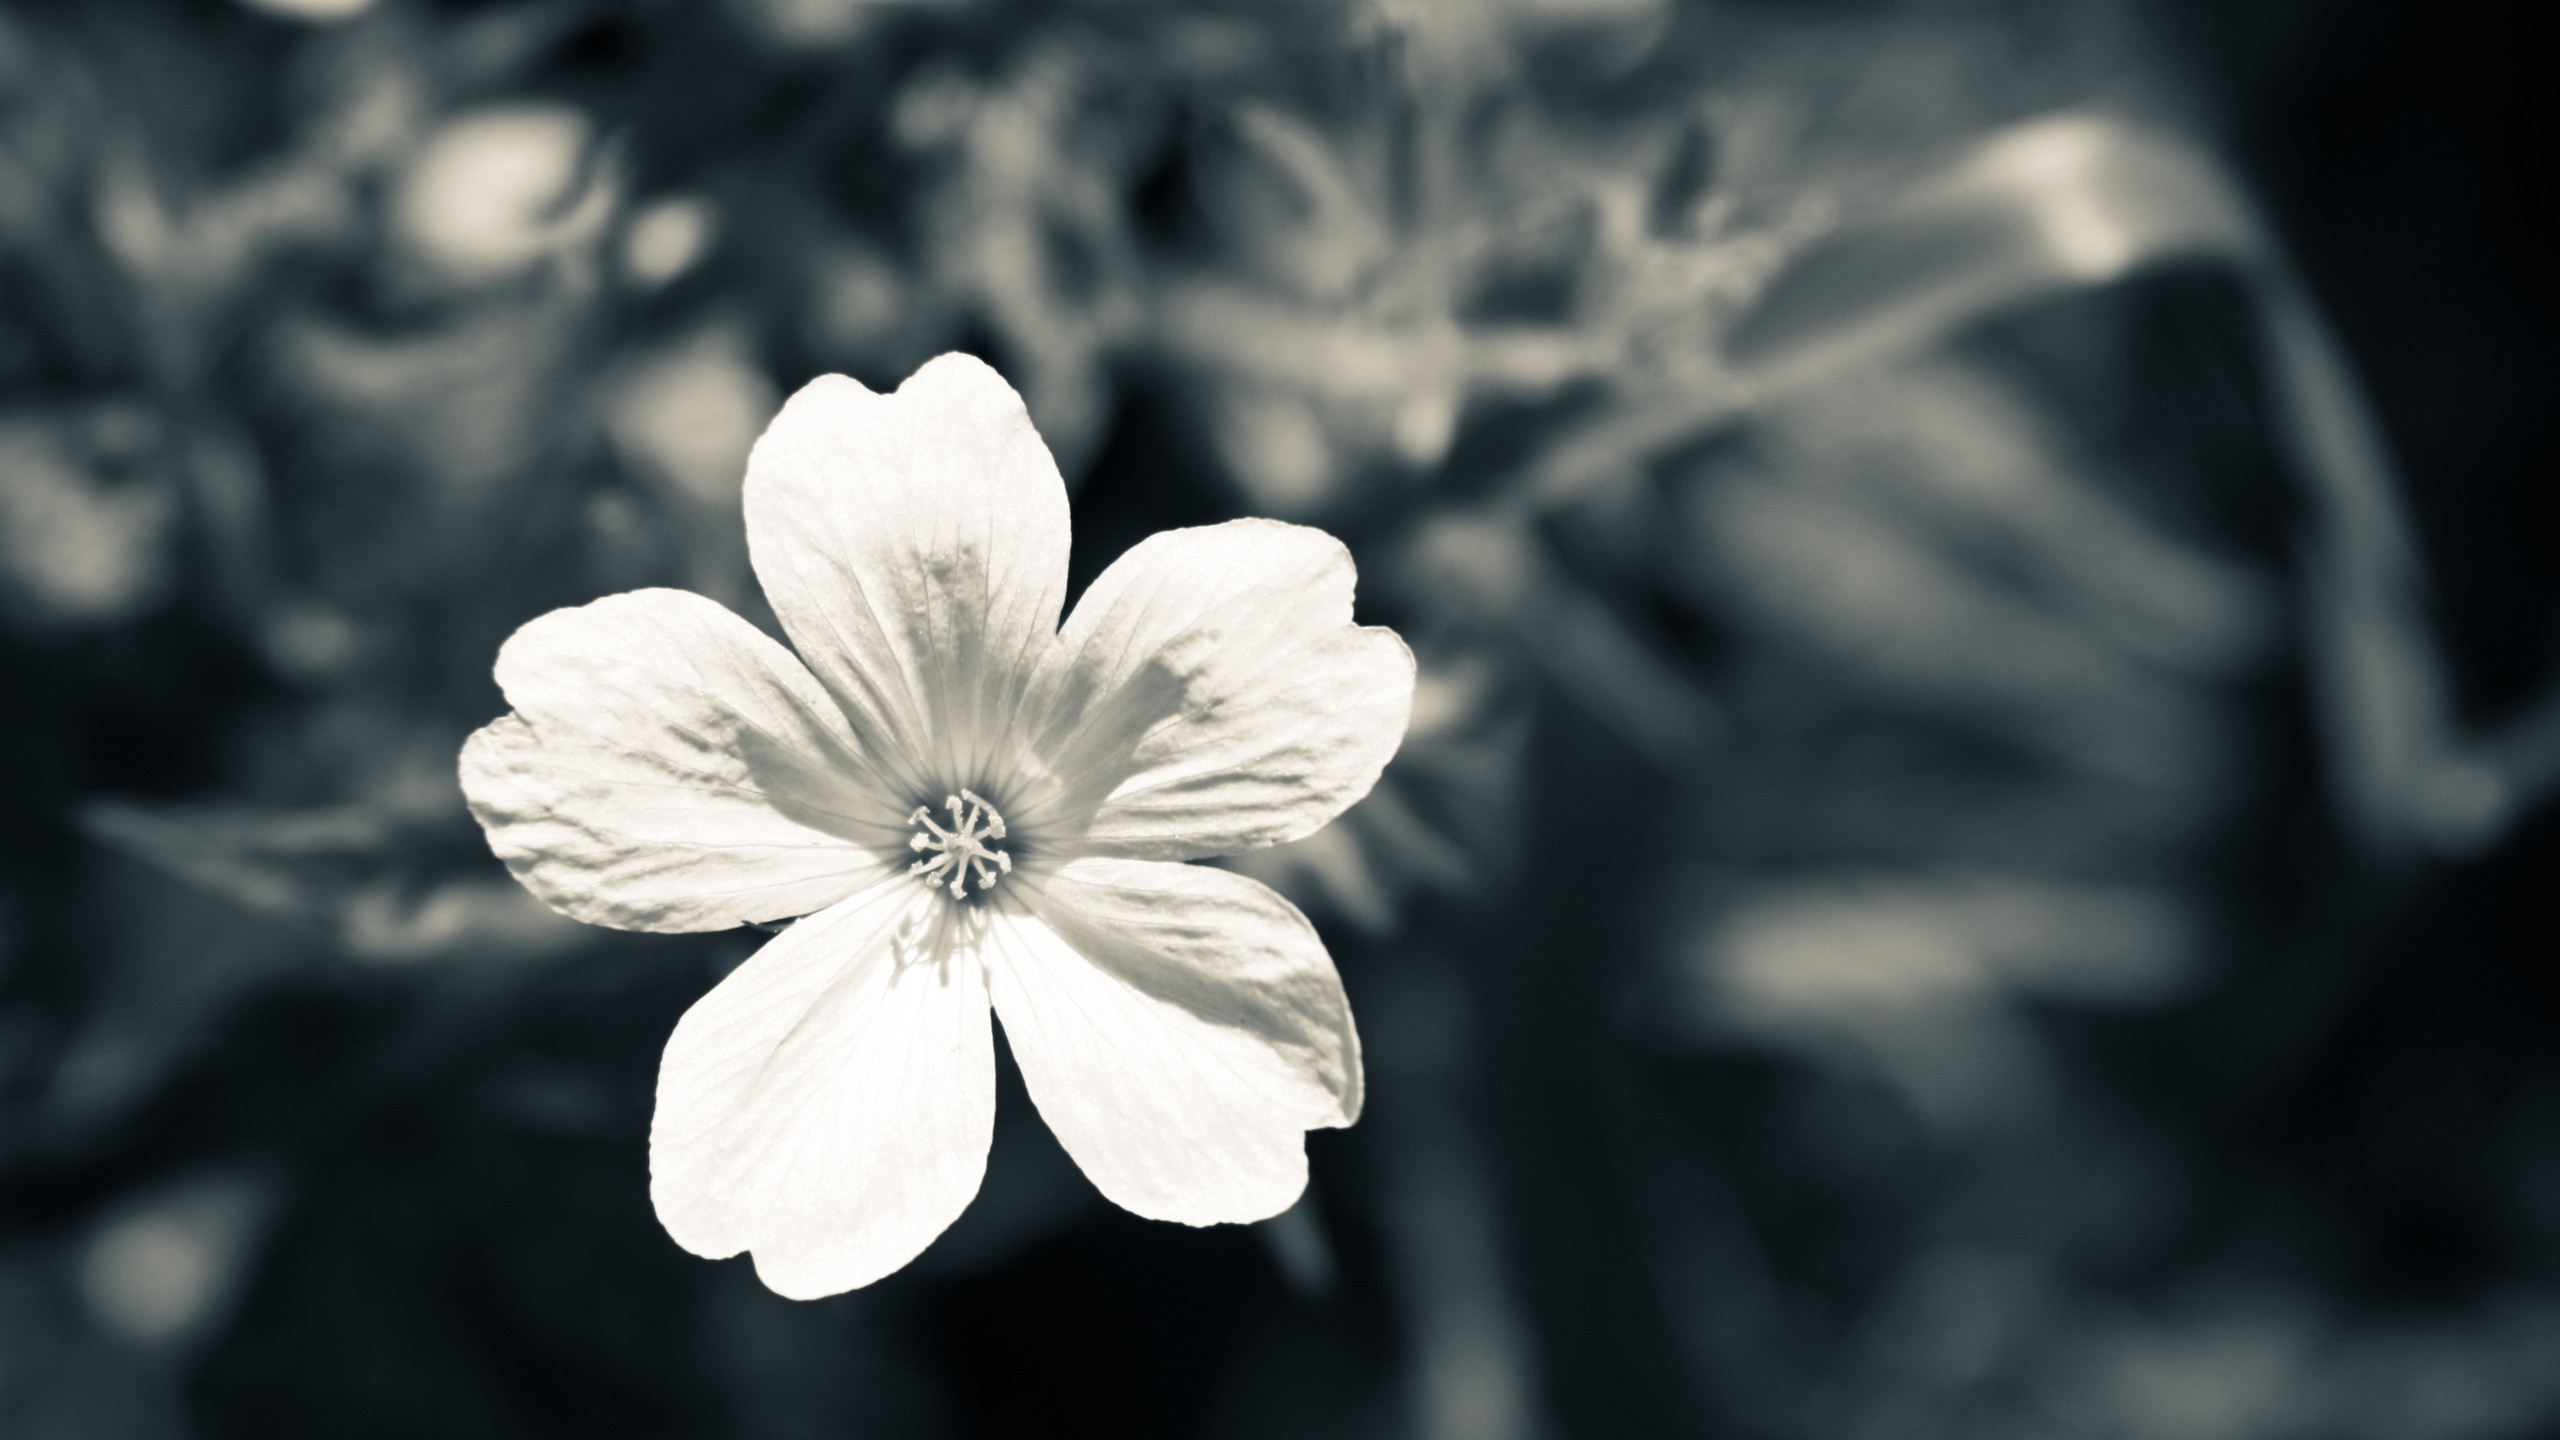 Nature Flowers Black And White